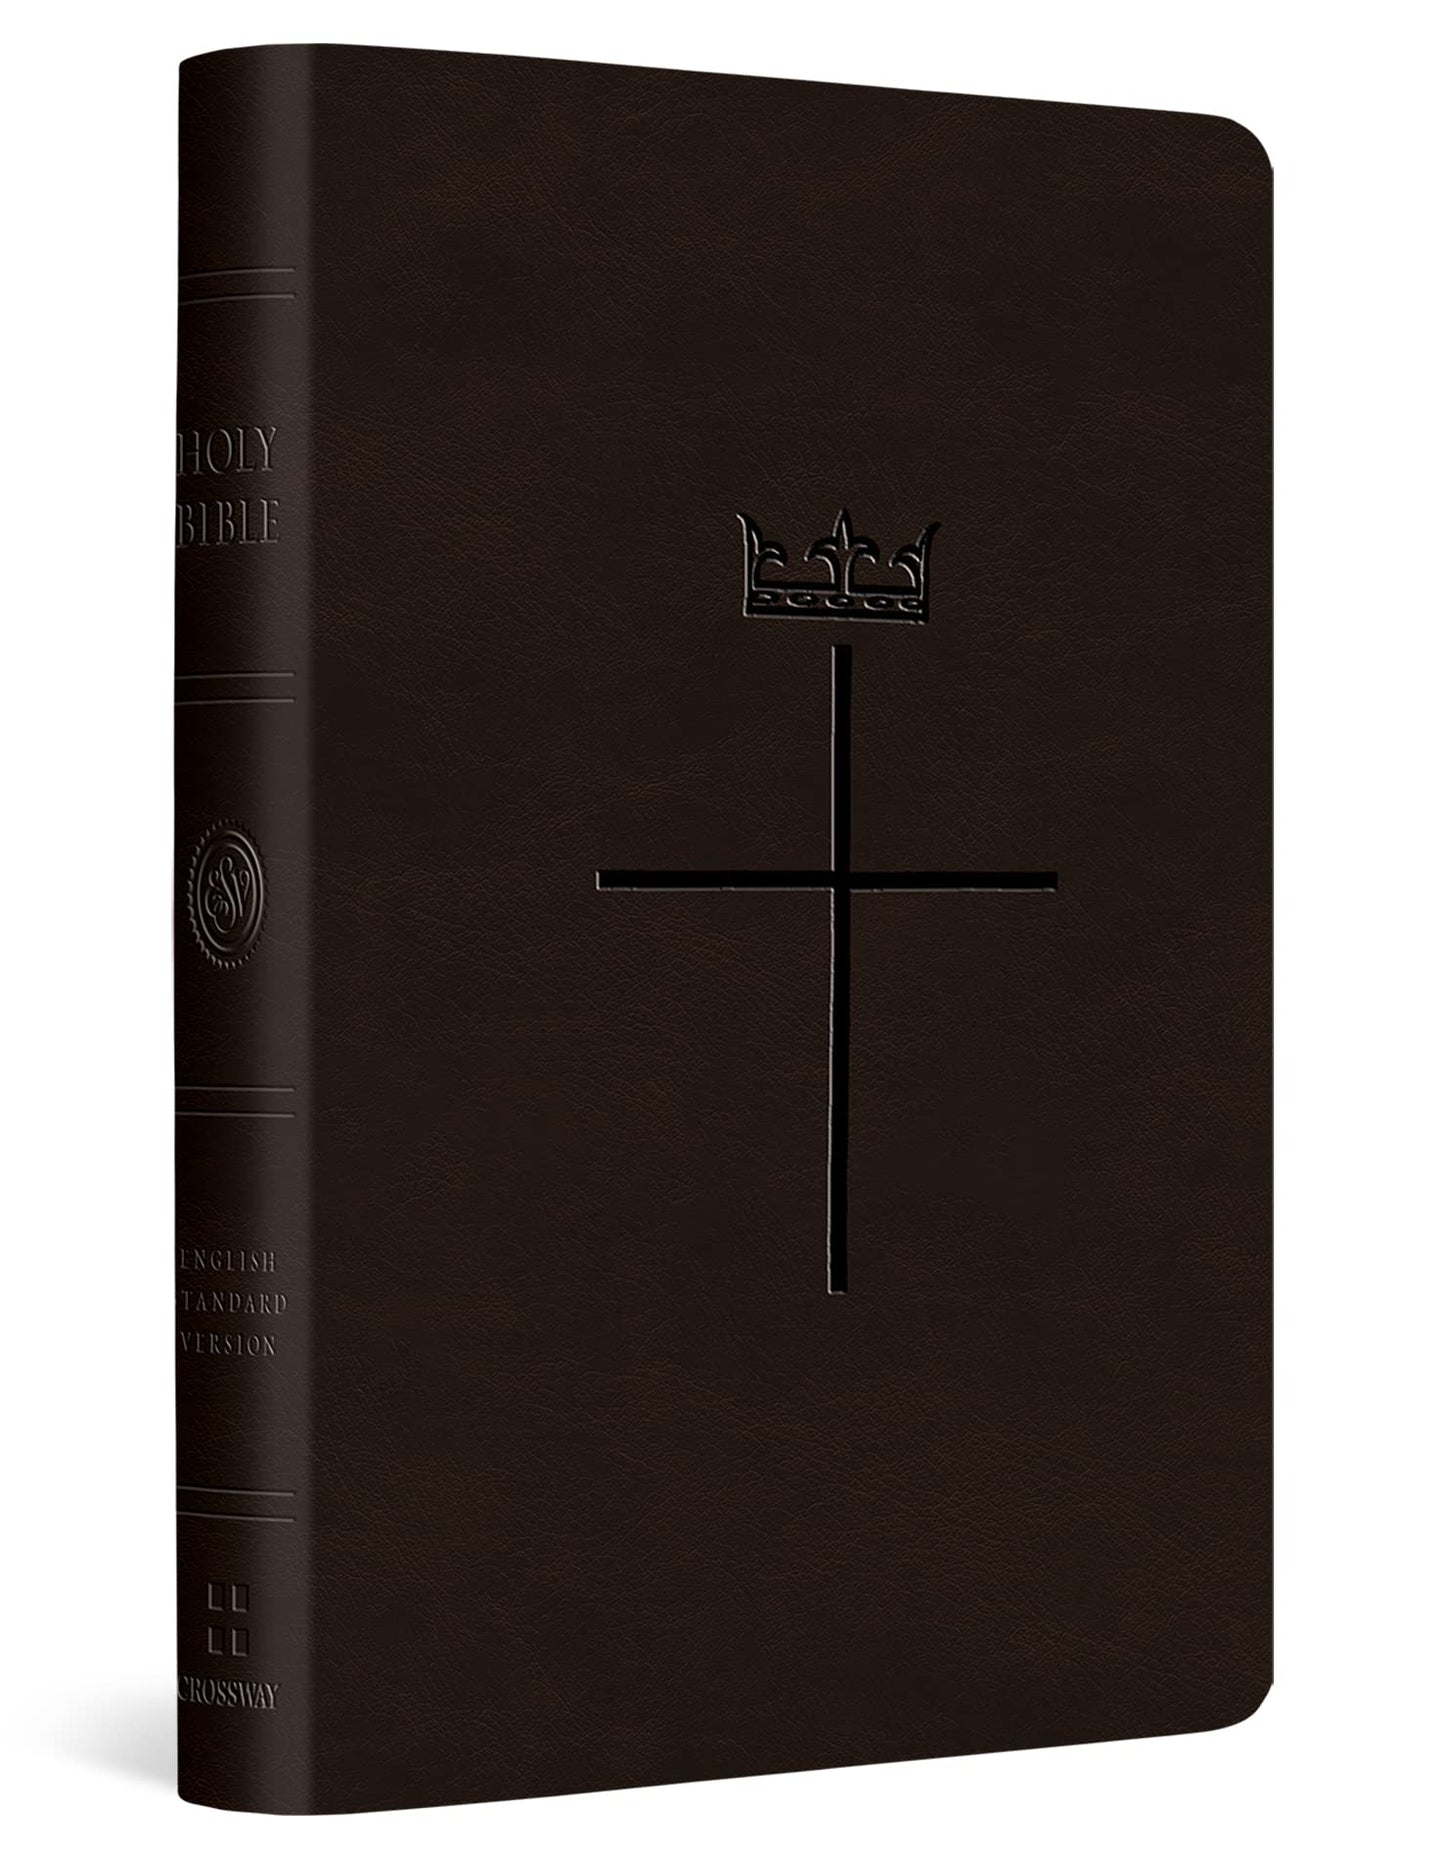 ESV Value Compact Bible >>OUT OF PRINT<<